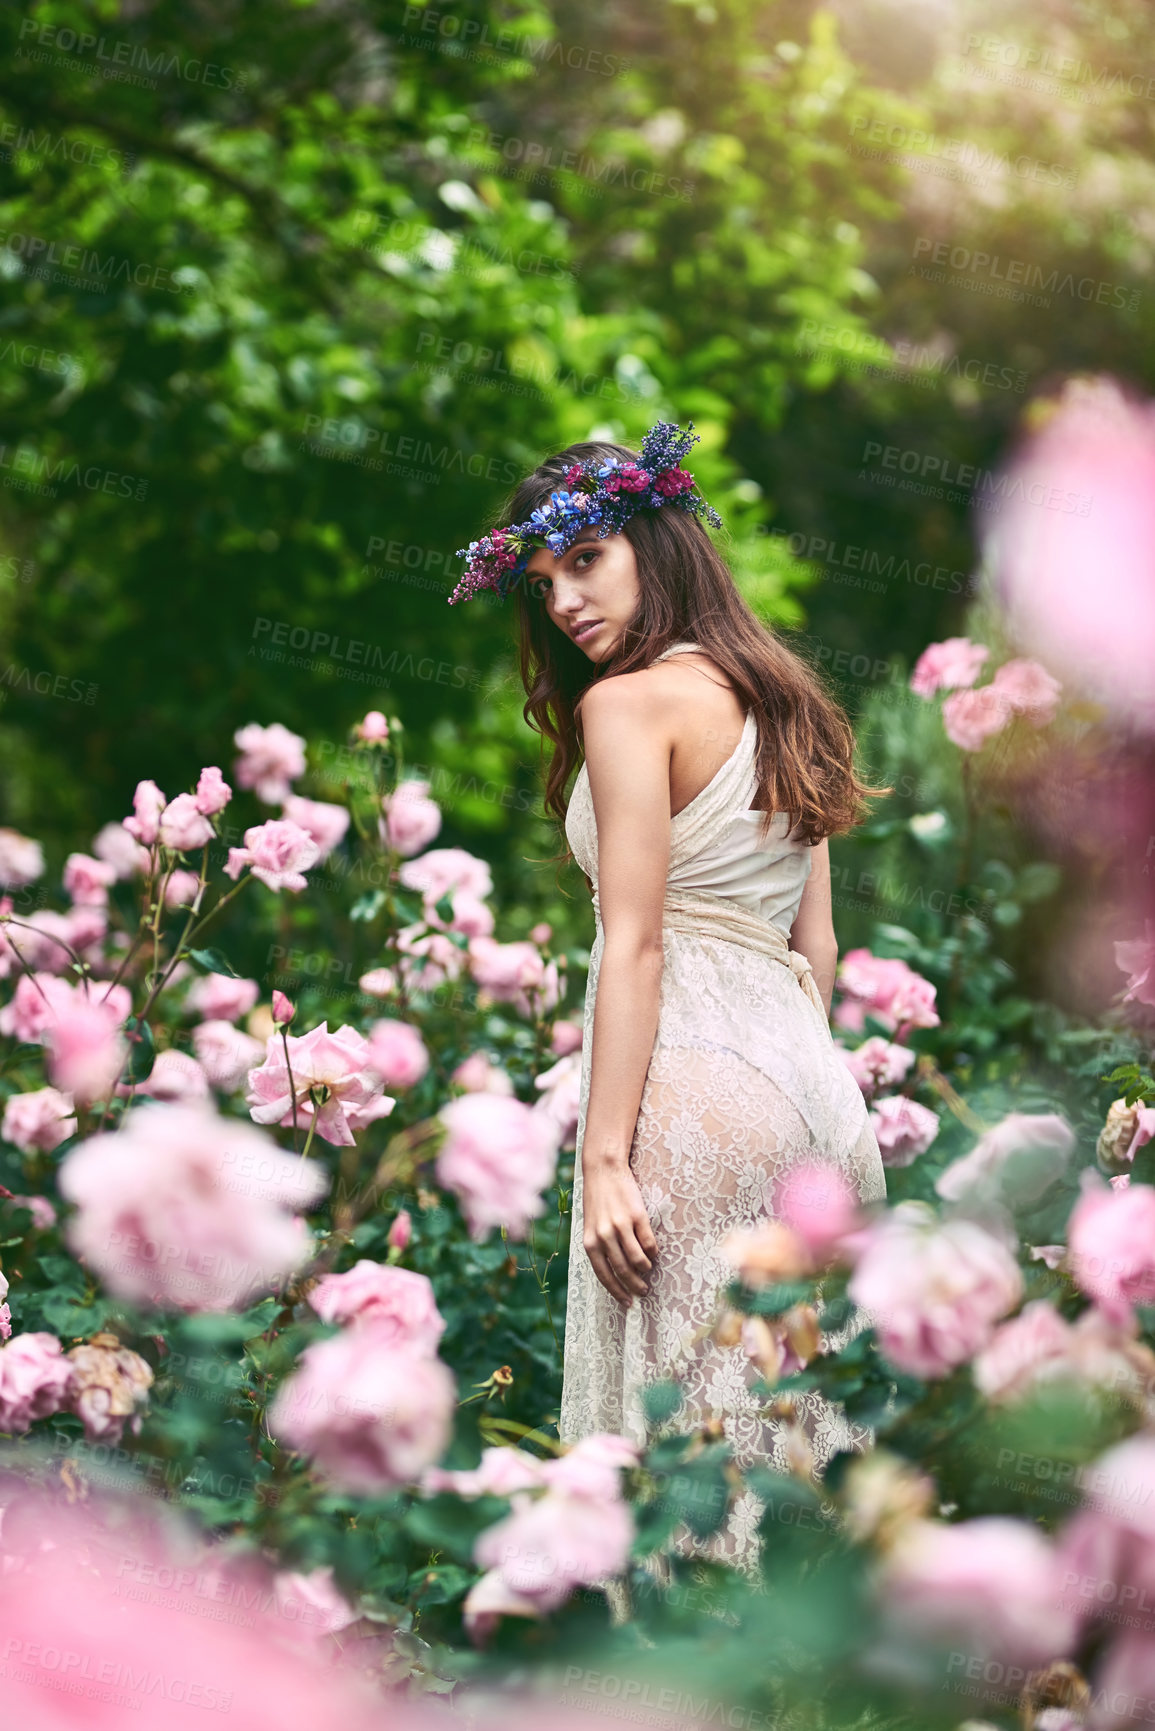 Buy stock photo Shot of a beautiful young woman wearing a floral head wreath posing in nature